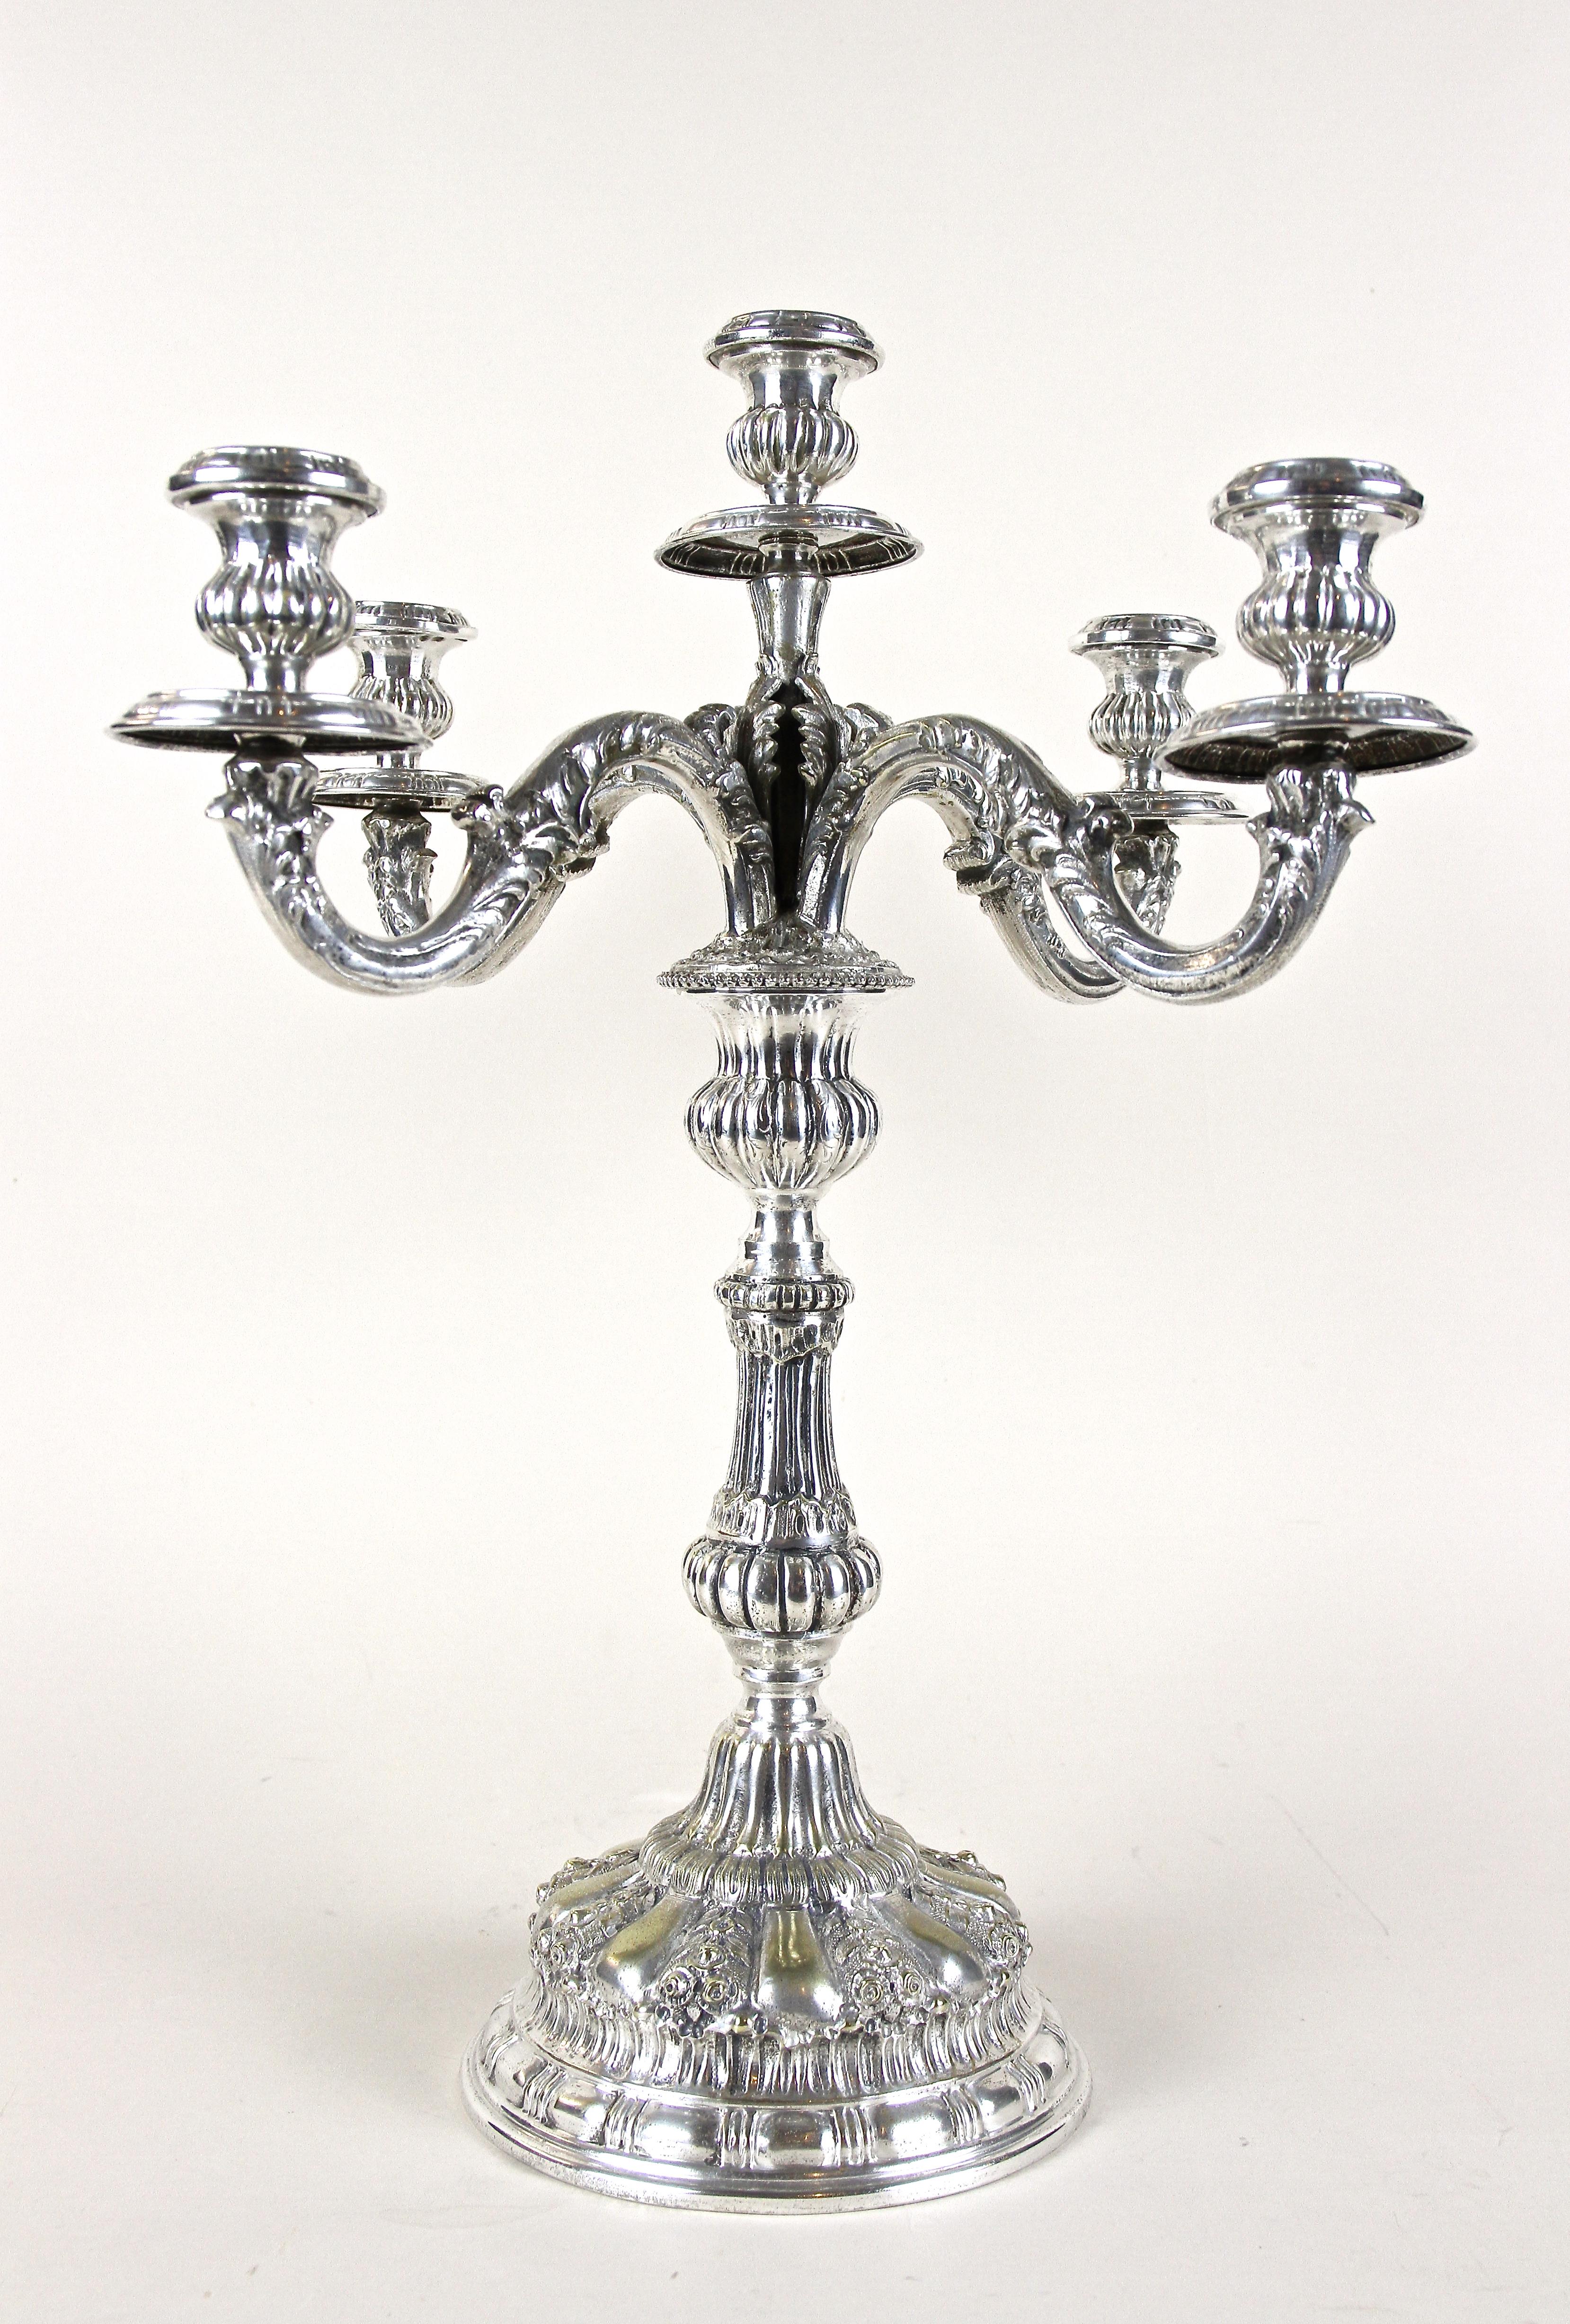 Pair of 19th Century Silvered Candelabras 5-Armed, Austria, circa 1860 For Sale 1